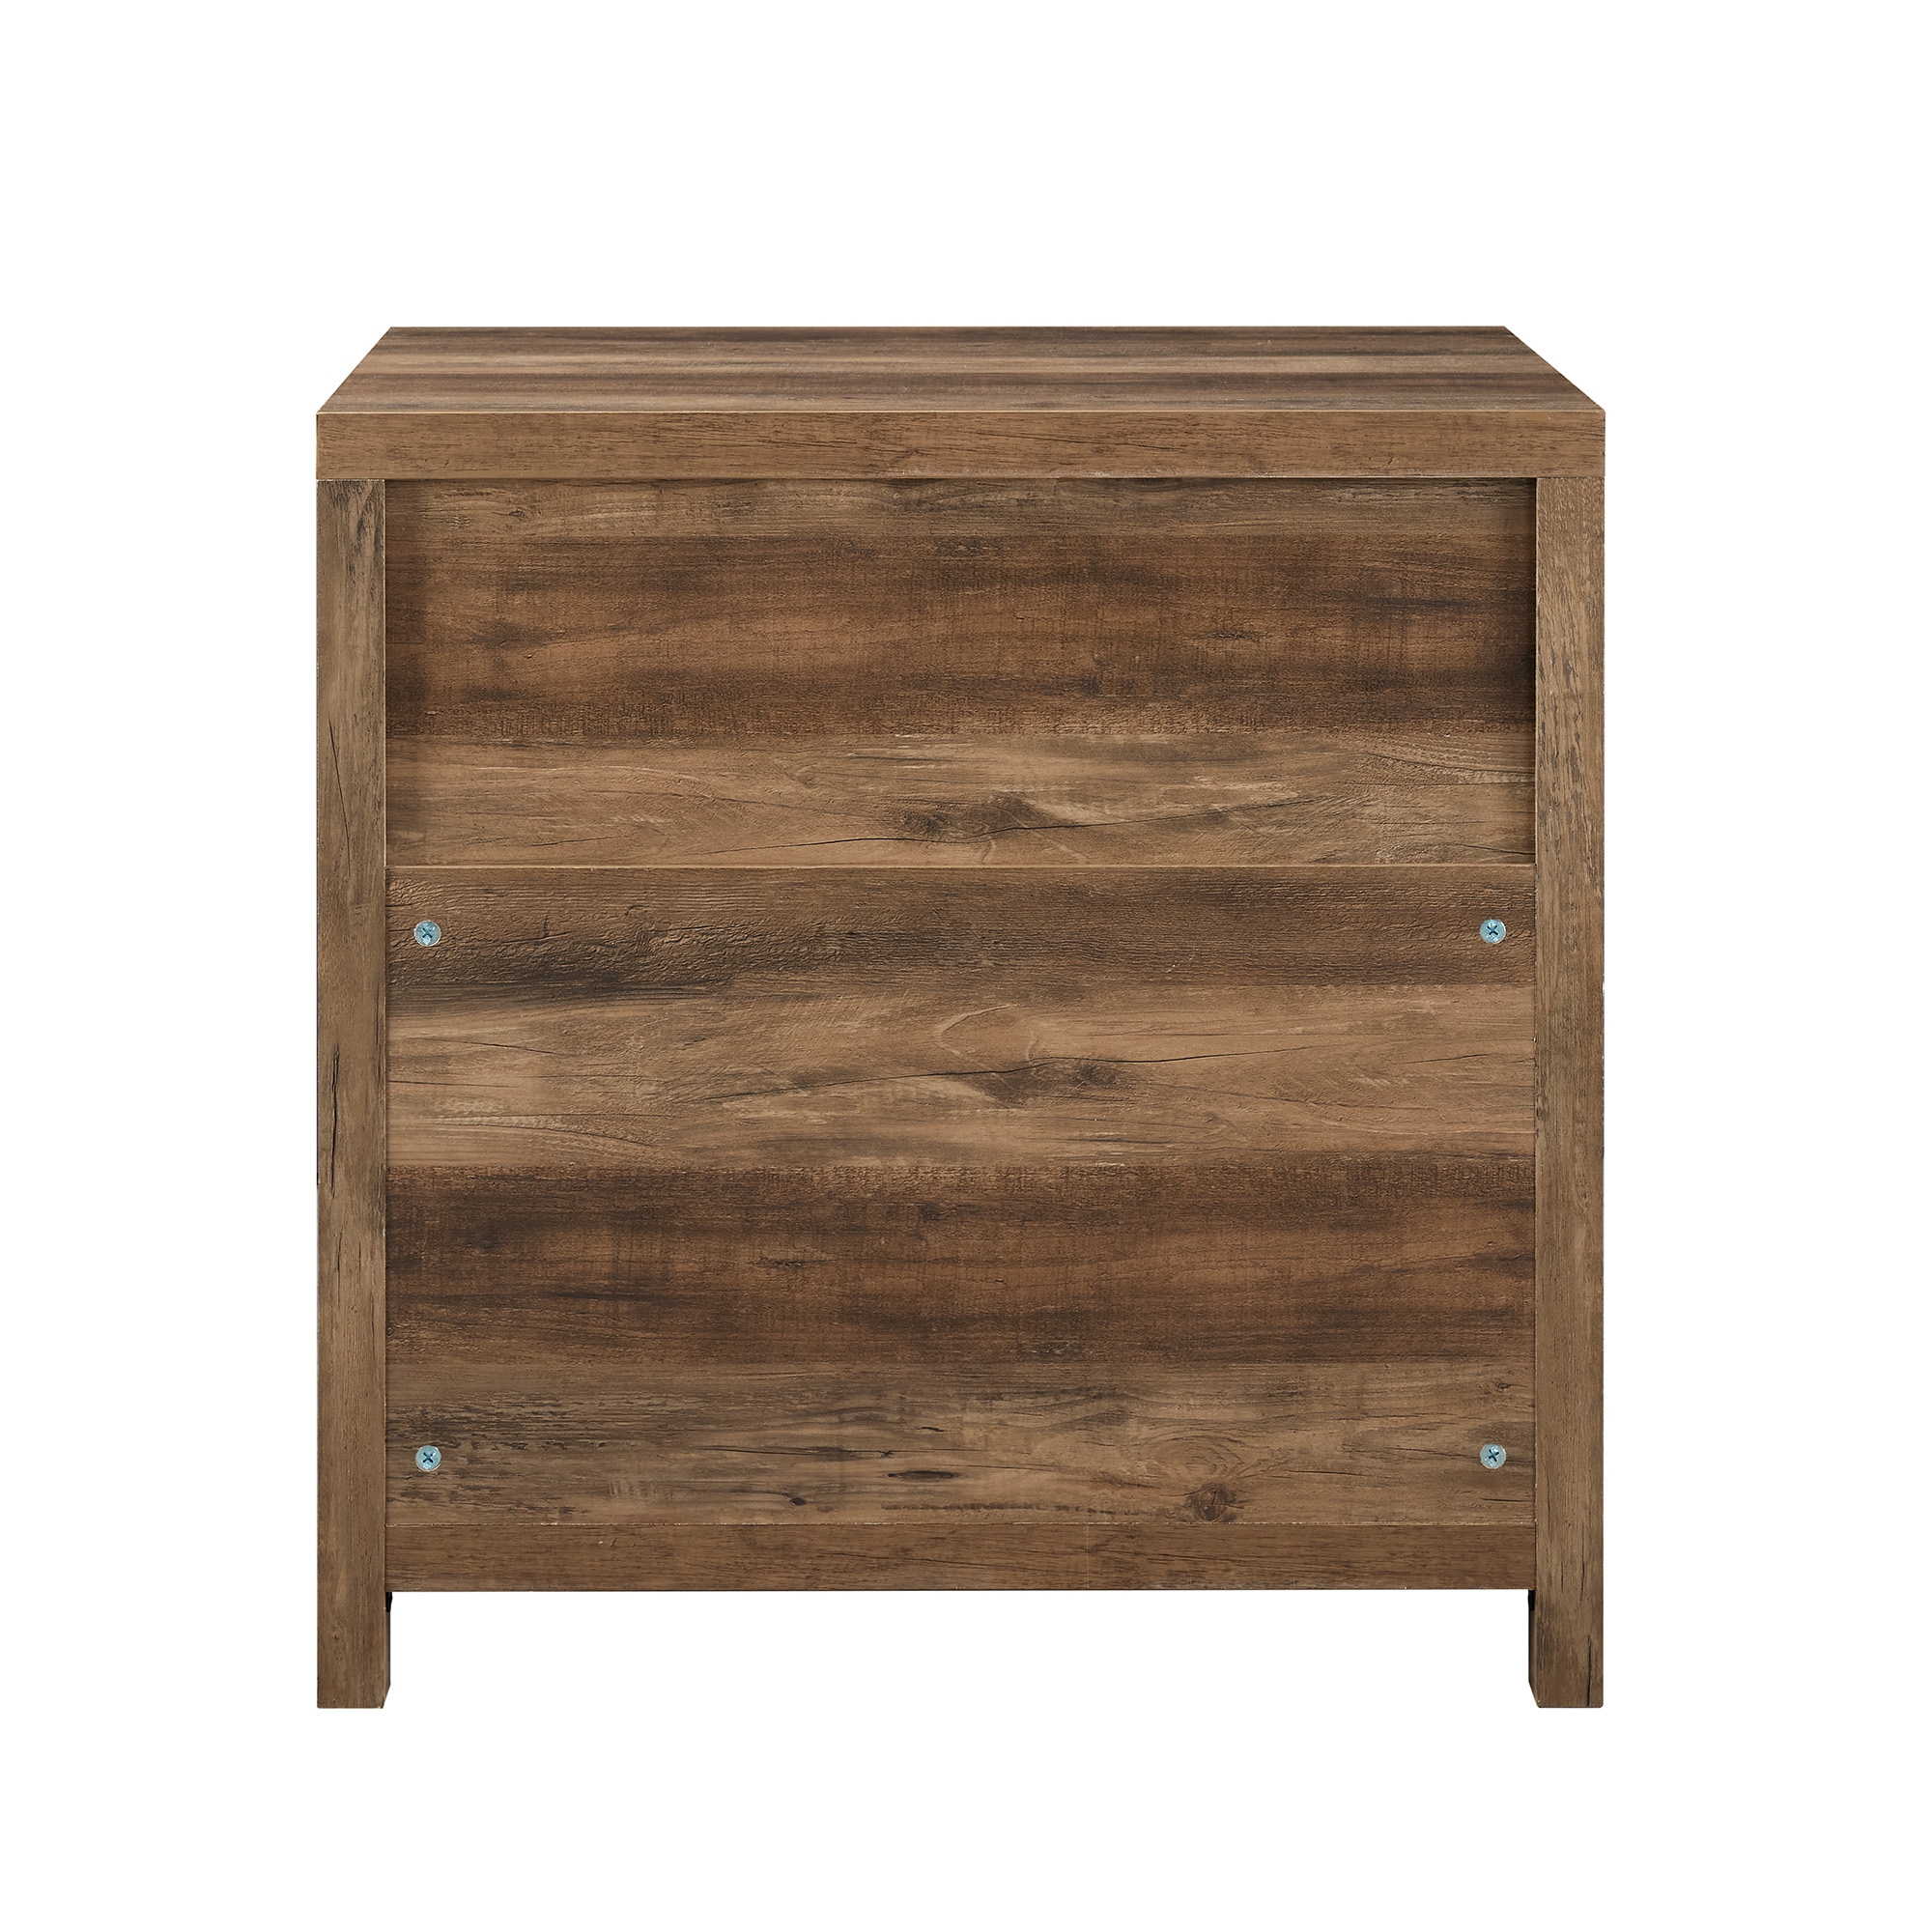 Modern Farmhouse 2-Drawer Filing Cabinet with Metal Accents – Rustic Oak - Image 3